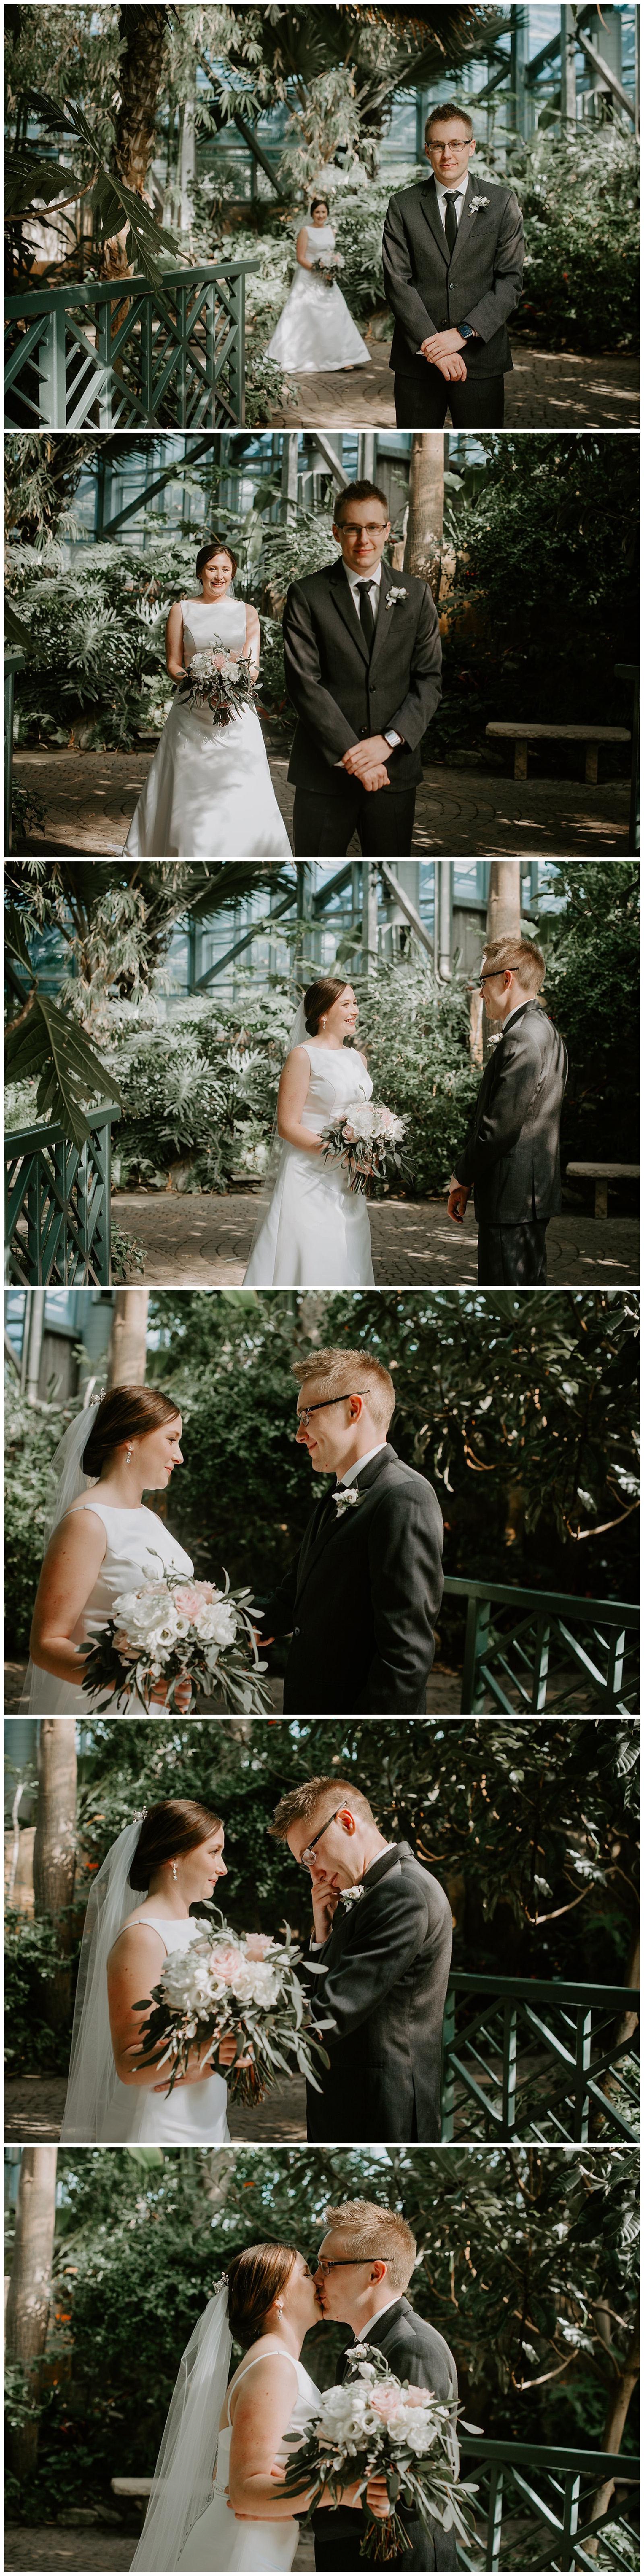 liv lyszyk photography a grand rapids wedding and elopement photographer captures intimate first look in greenhouse in grand rapids michigan